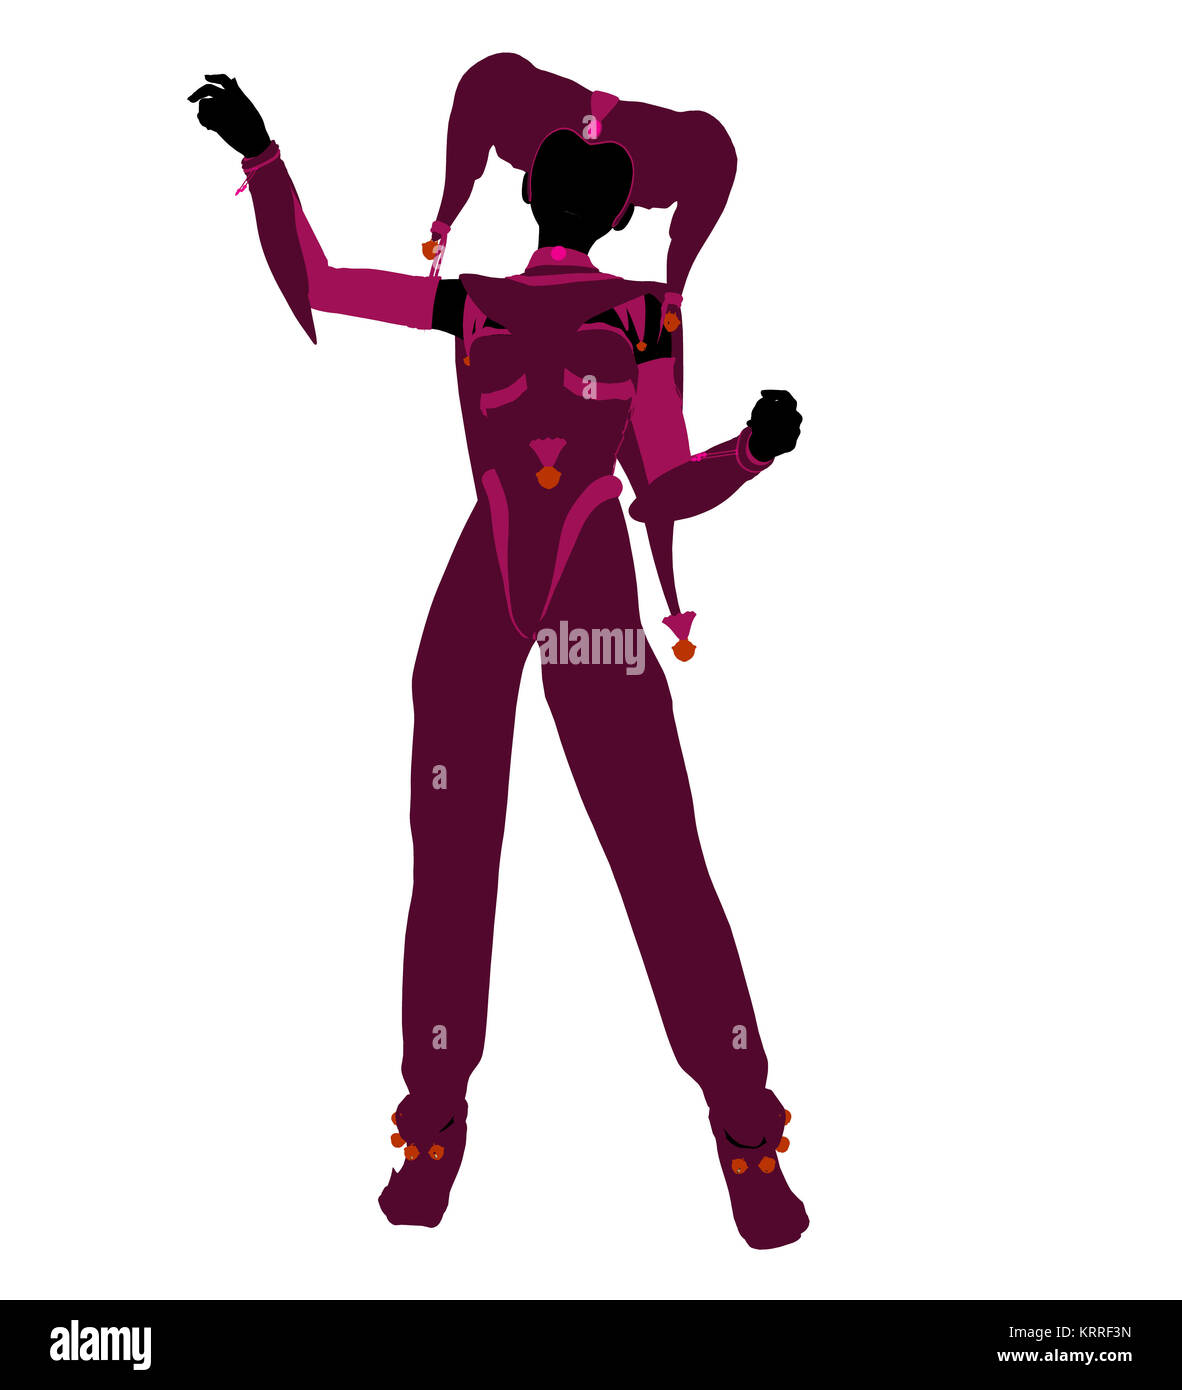 A girl joker silhouette dressed in a pink outfit on a white background Stock Photo